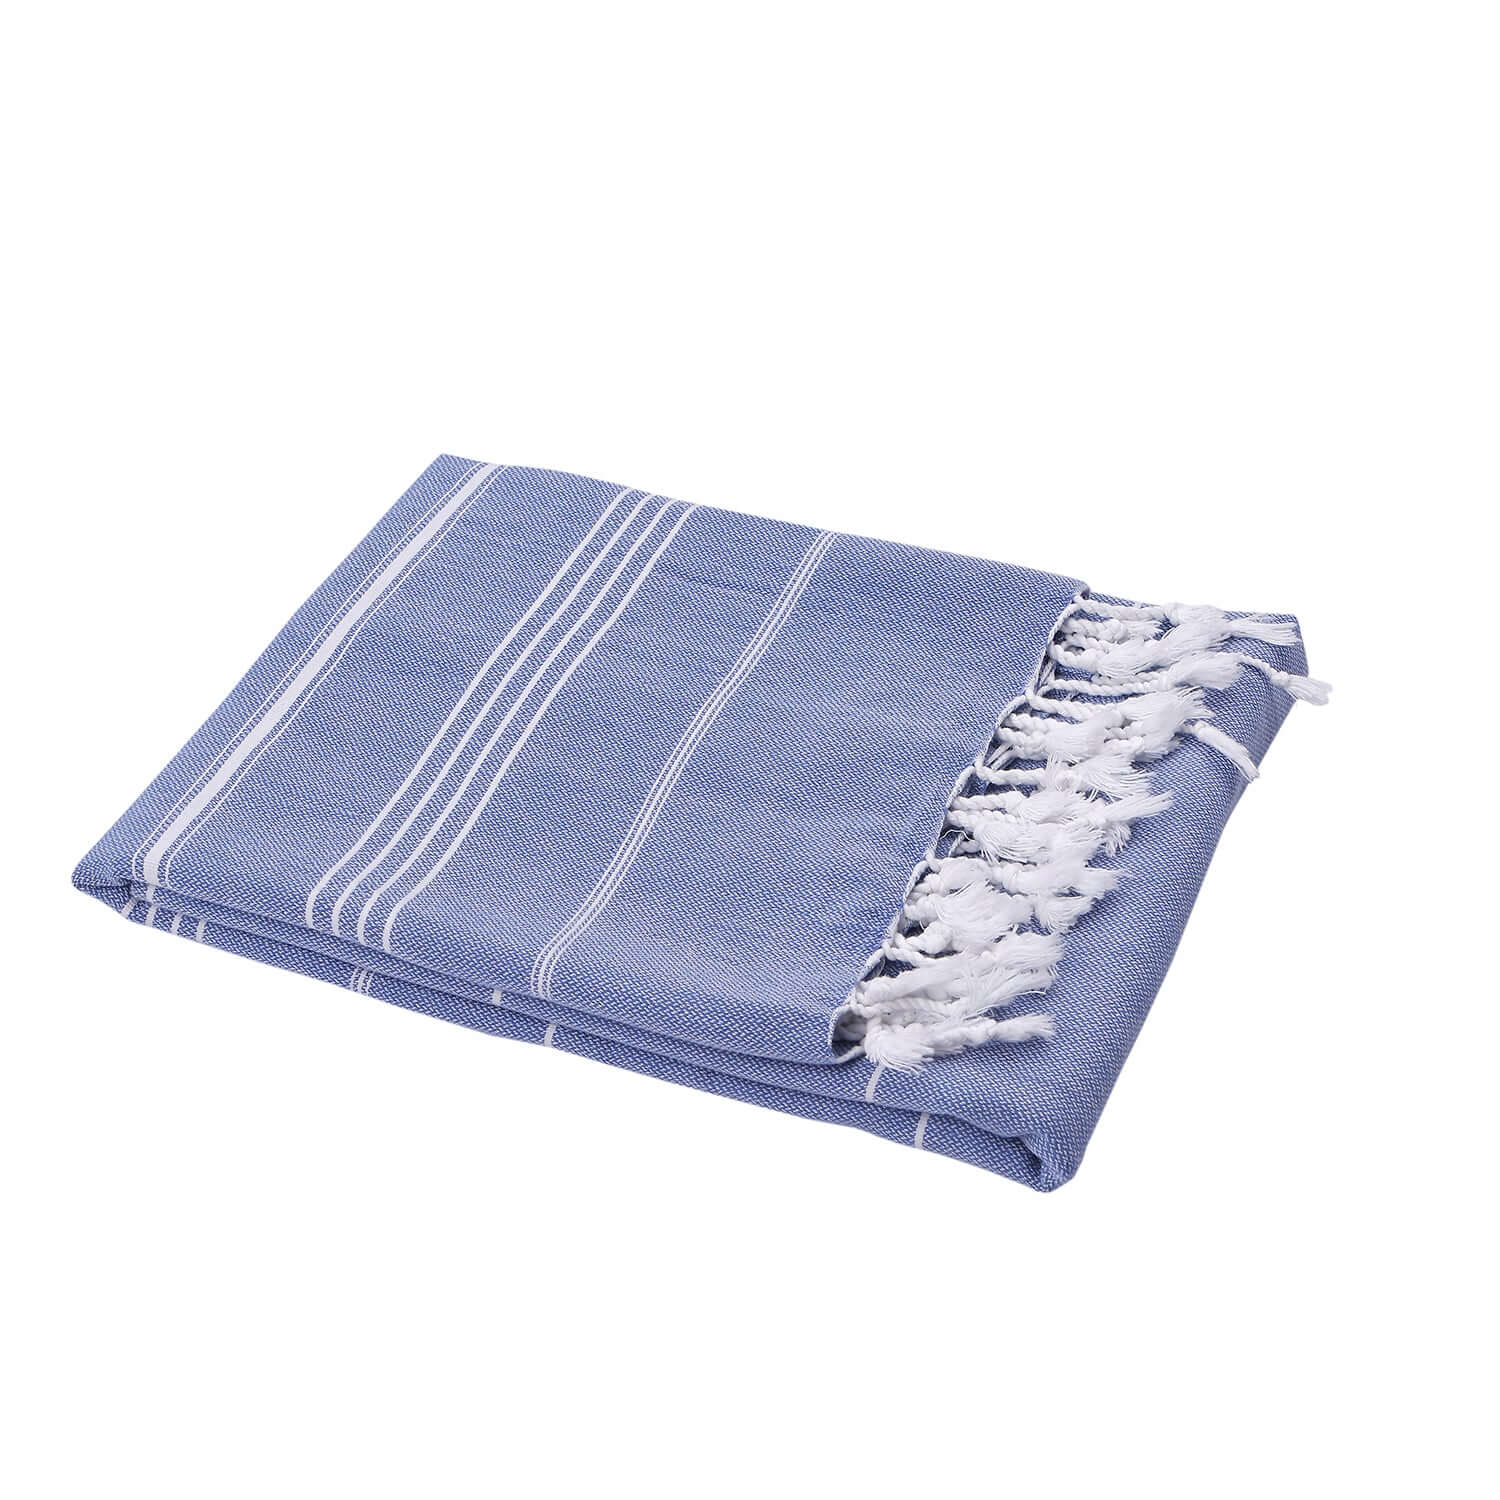 Folded Loom Legacy dark blue beach towel with subtle white vertical stripes. The towel features fringed white tassels on its edge, all displayed against a white background.